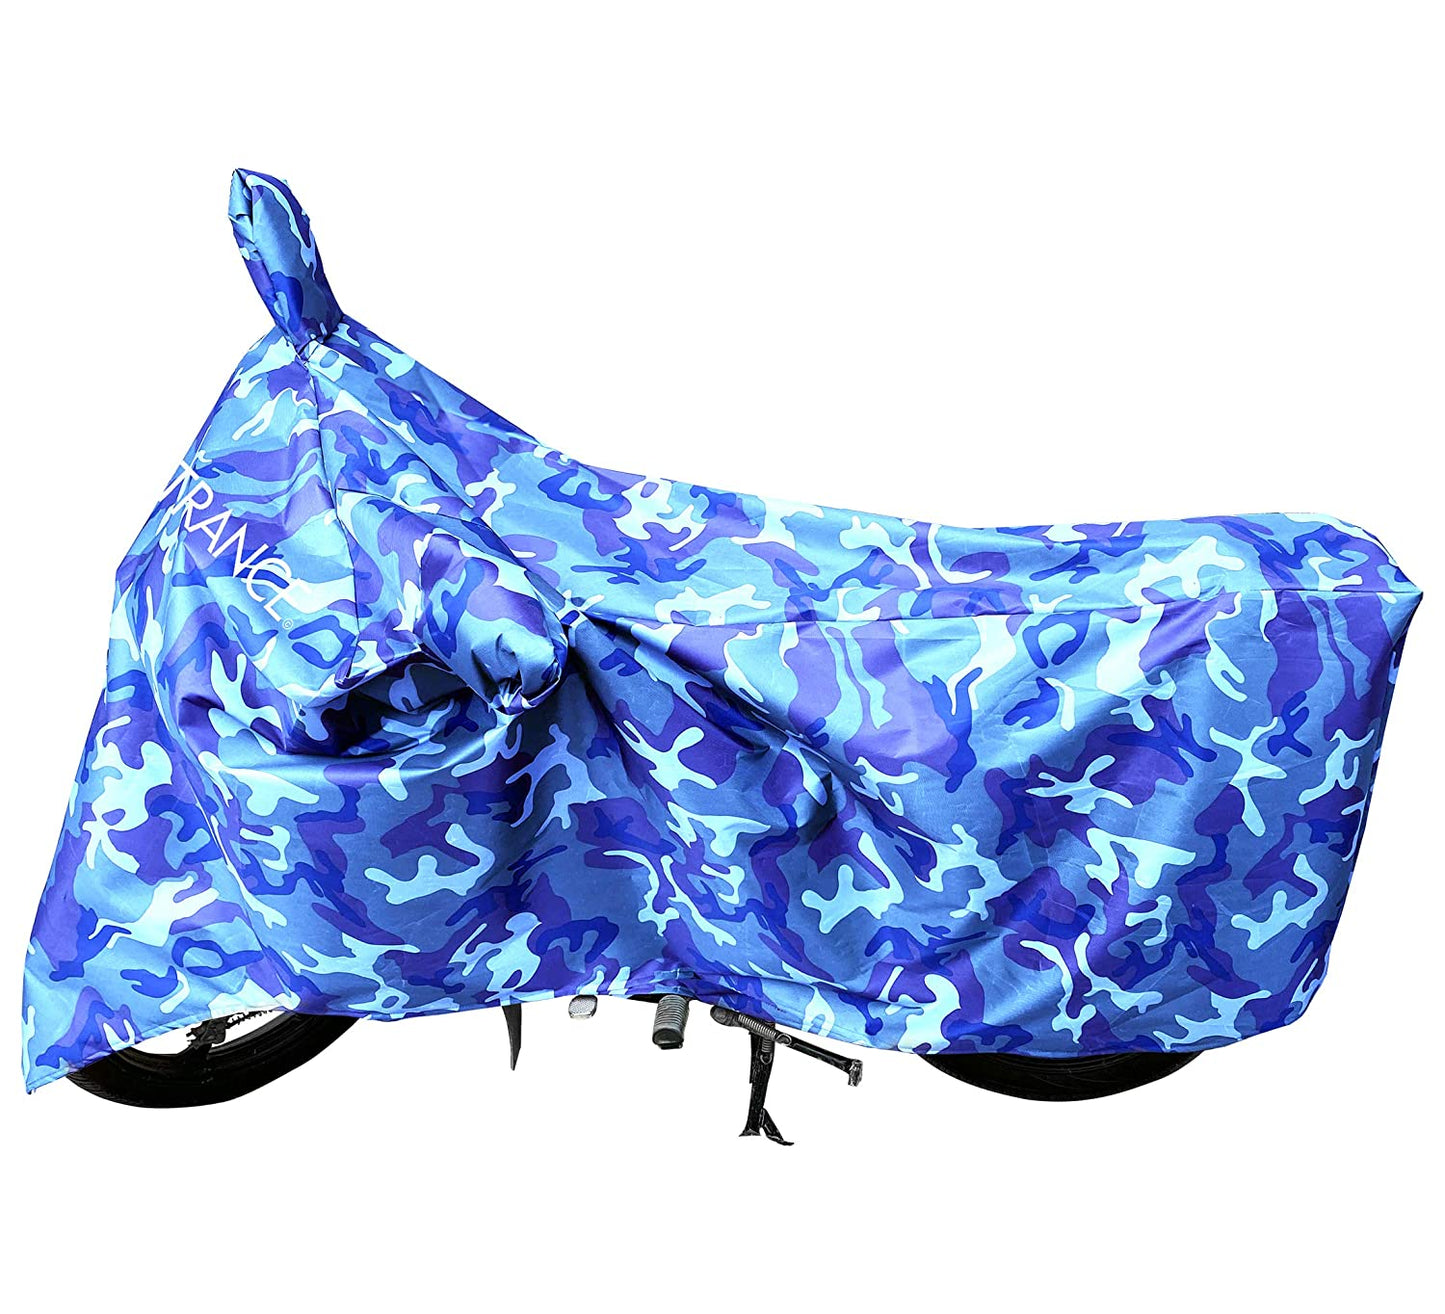 MotoTrance Jungle Bike Body Covers For KTM Duke 200 - Interlock-Stitched Waterproof and Heat Resistant with Mirror Pockets